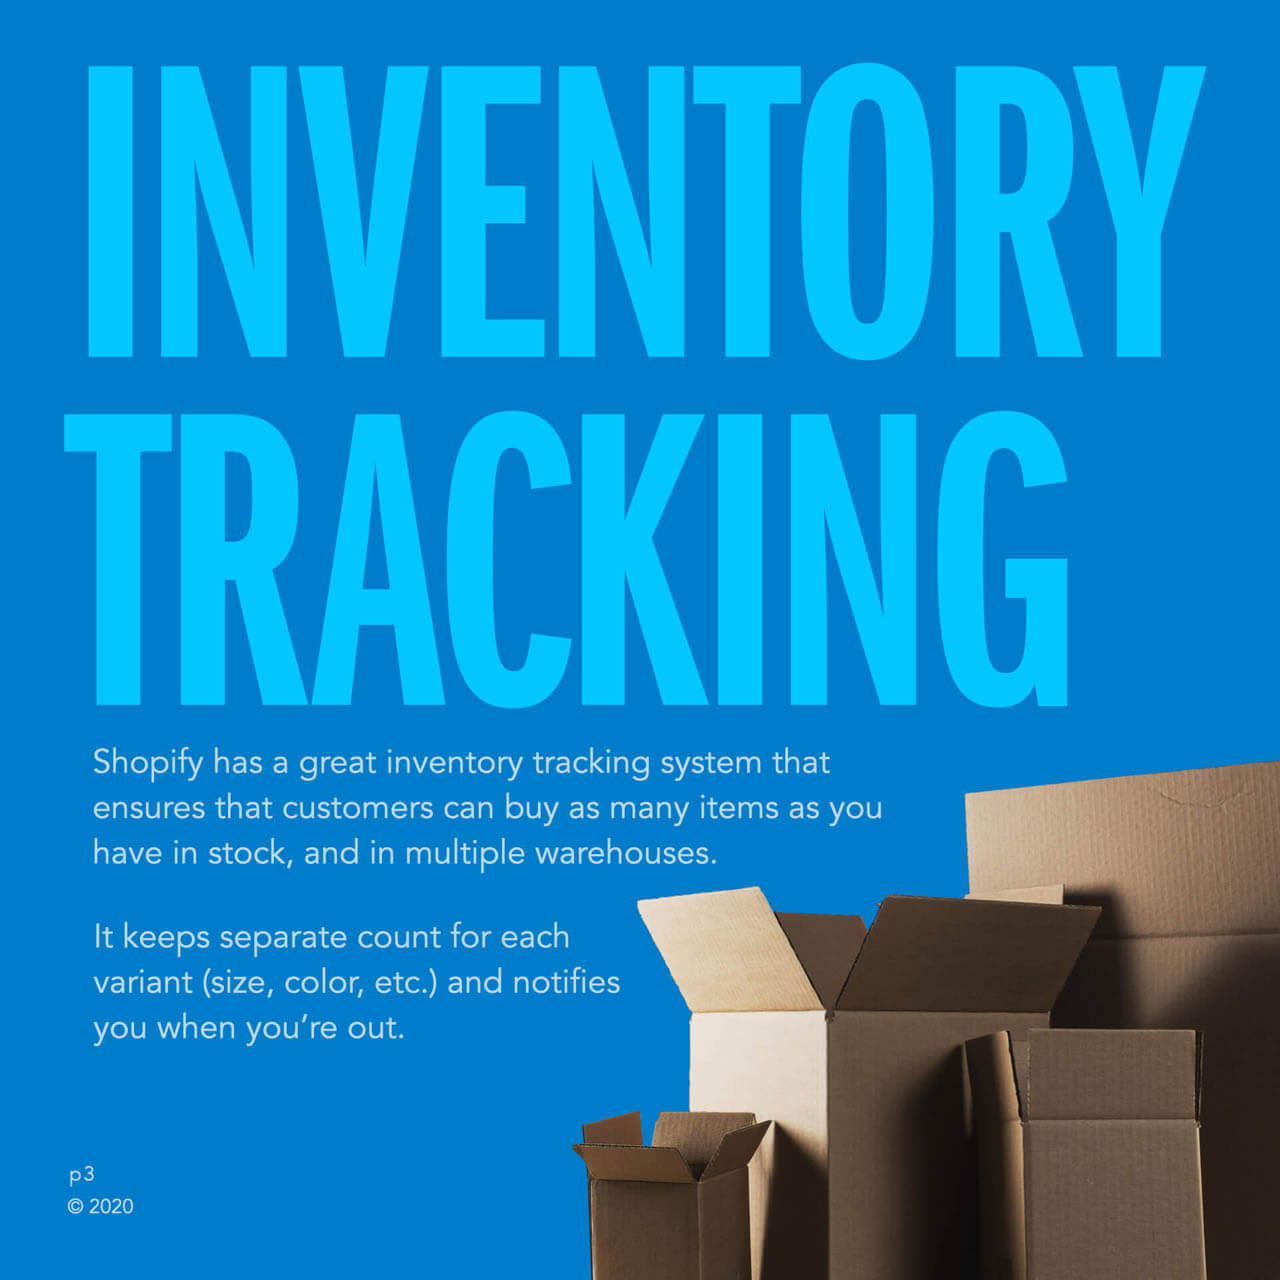 Inventory Tracking